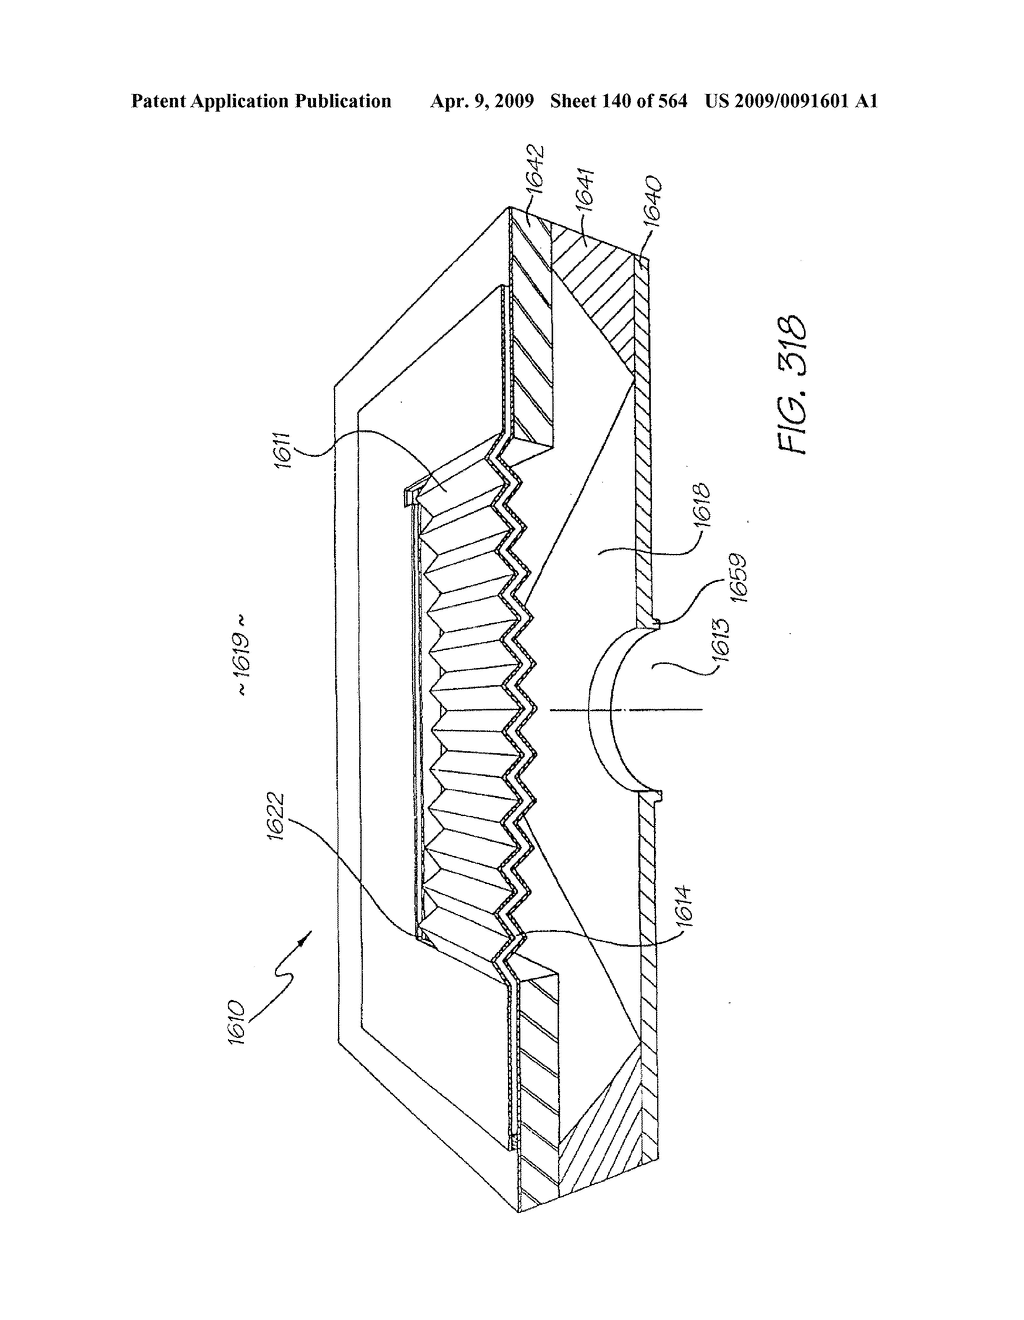 Inkjet Nozzle Utilizing Electrostatic Attraction Between Parallel Plates - diagram, schematic, and image 141